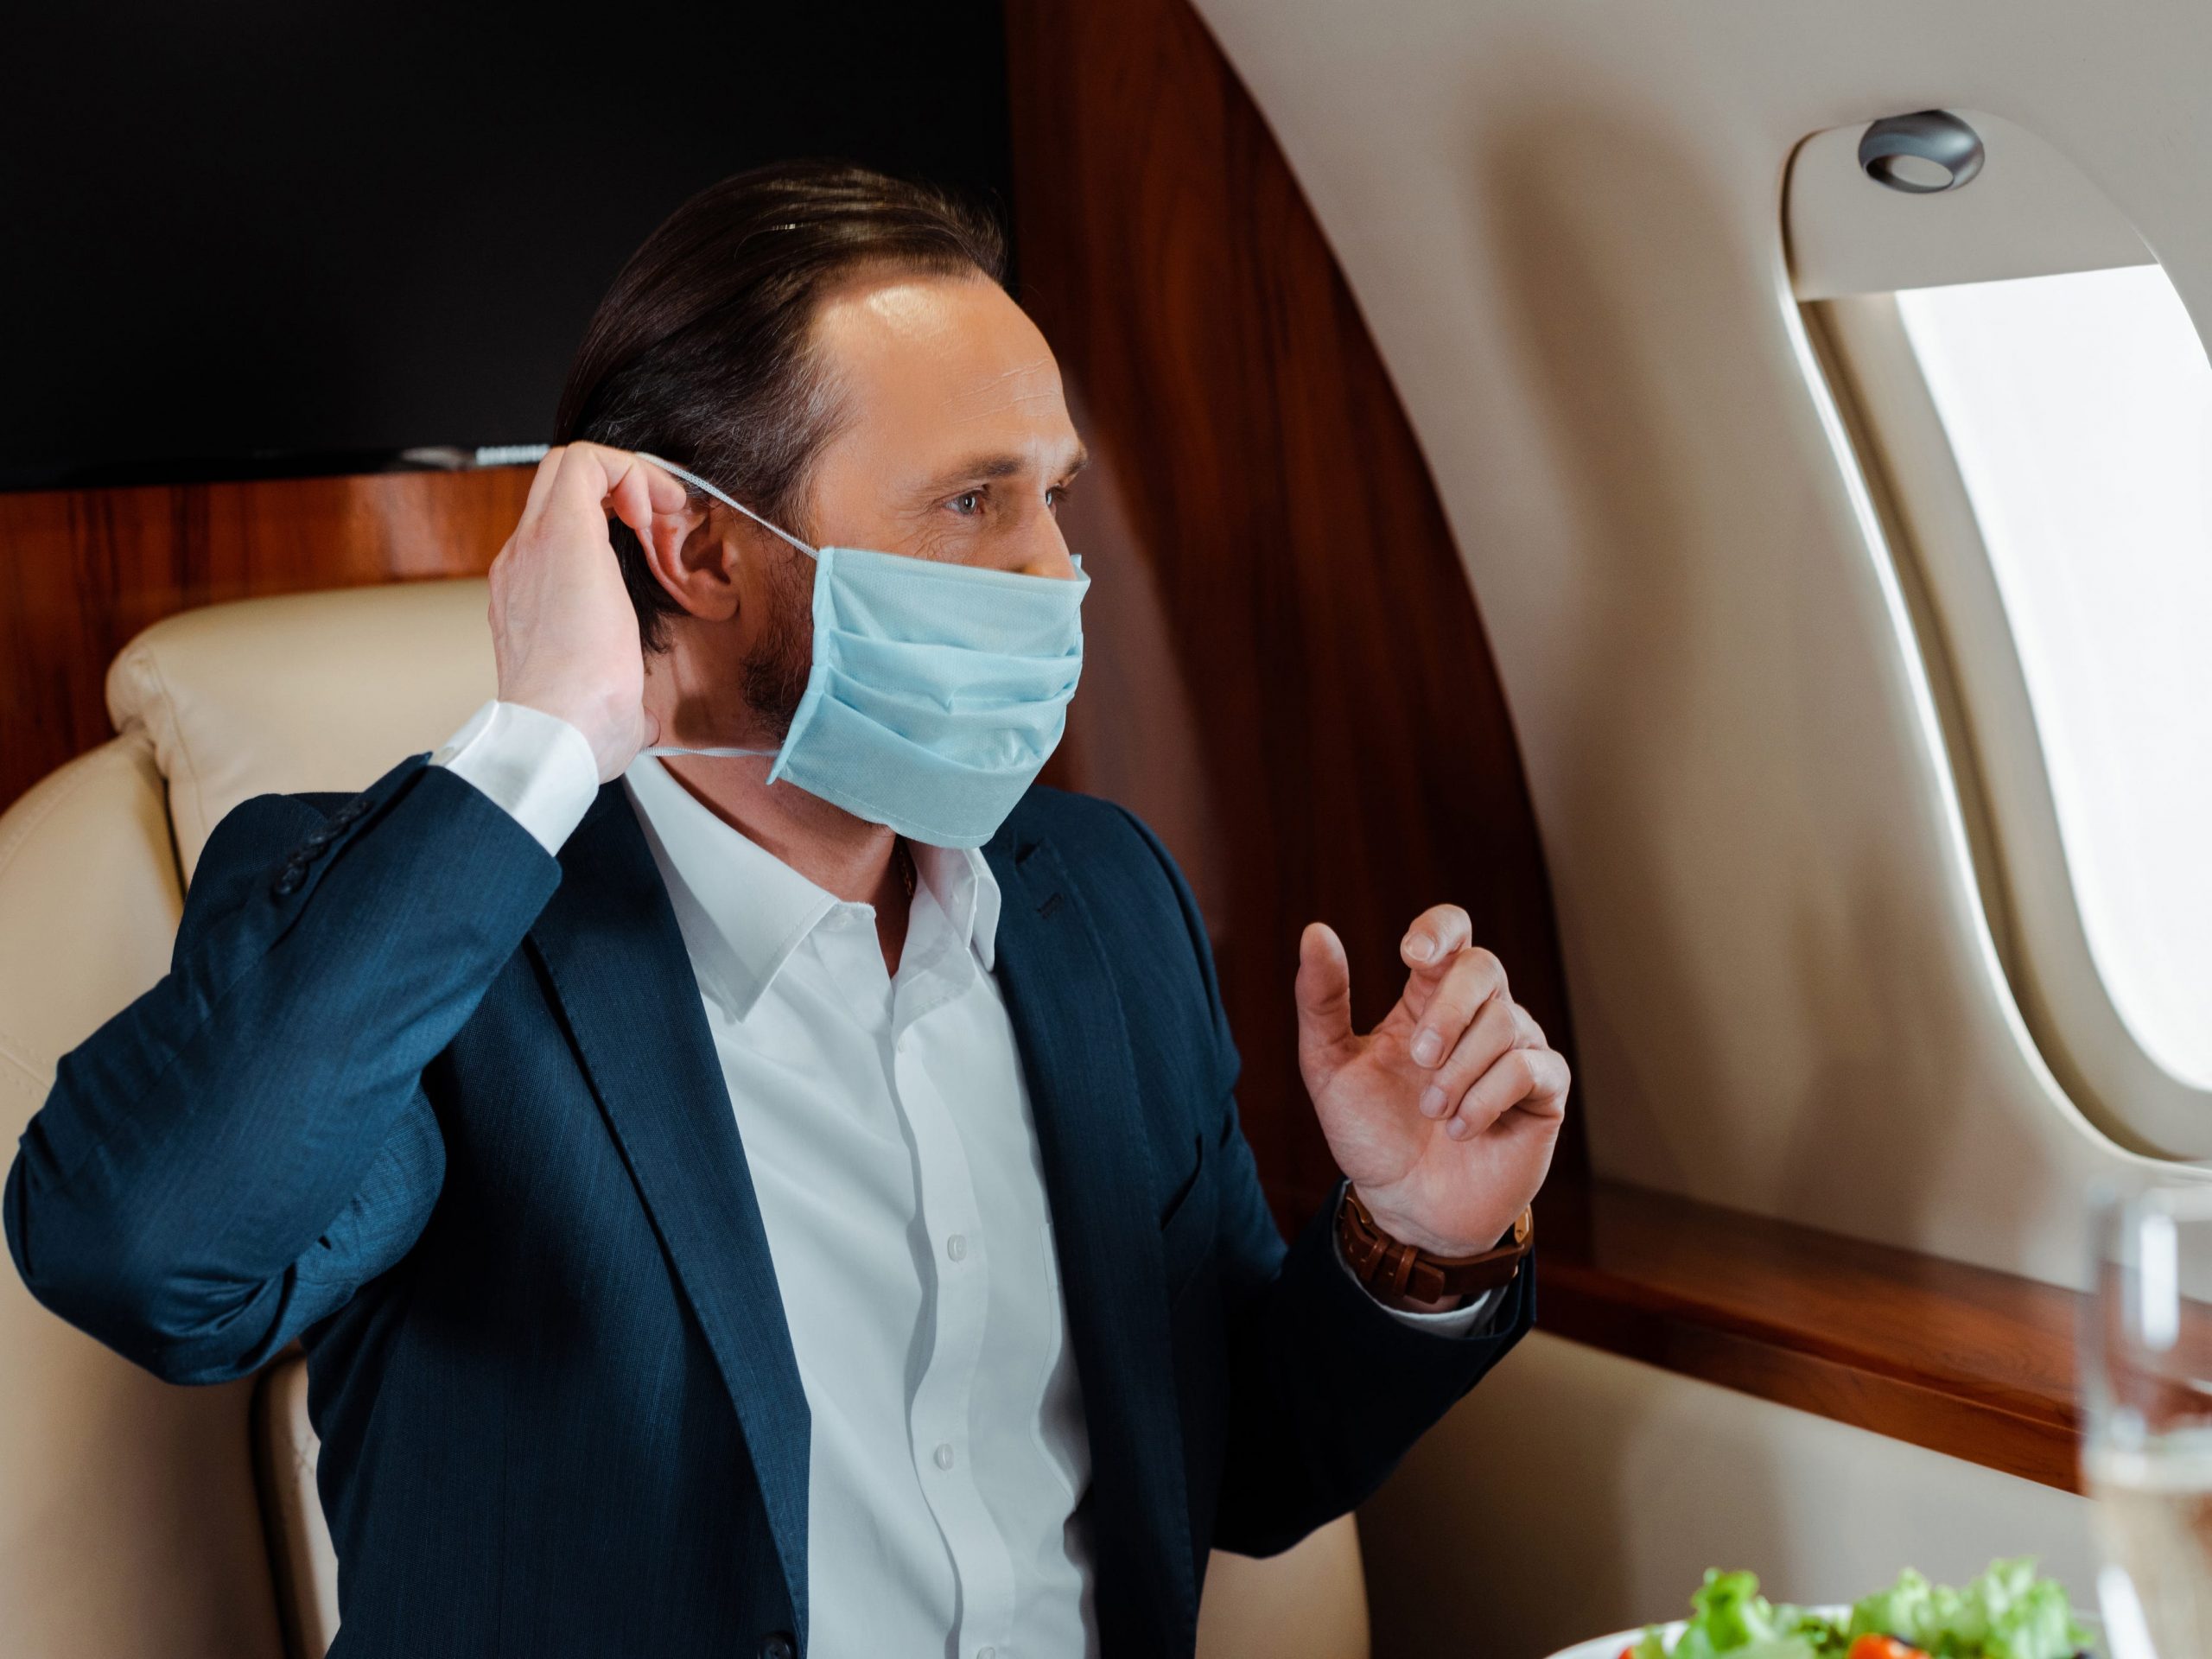 Private jet flyer wearing a mask